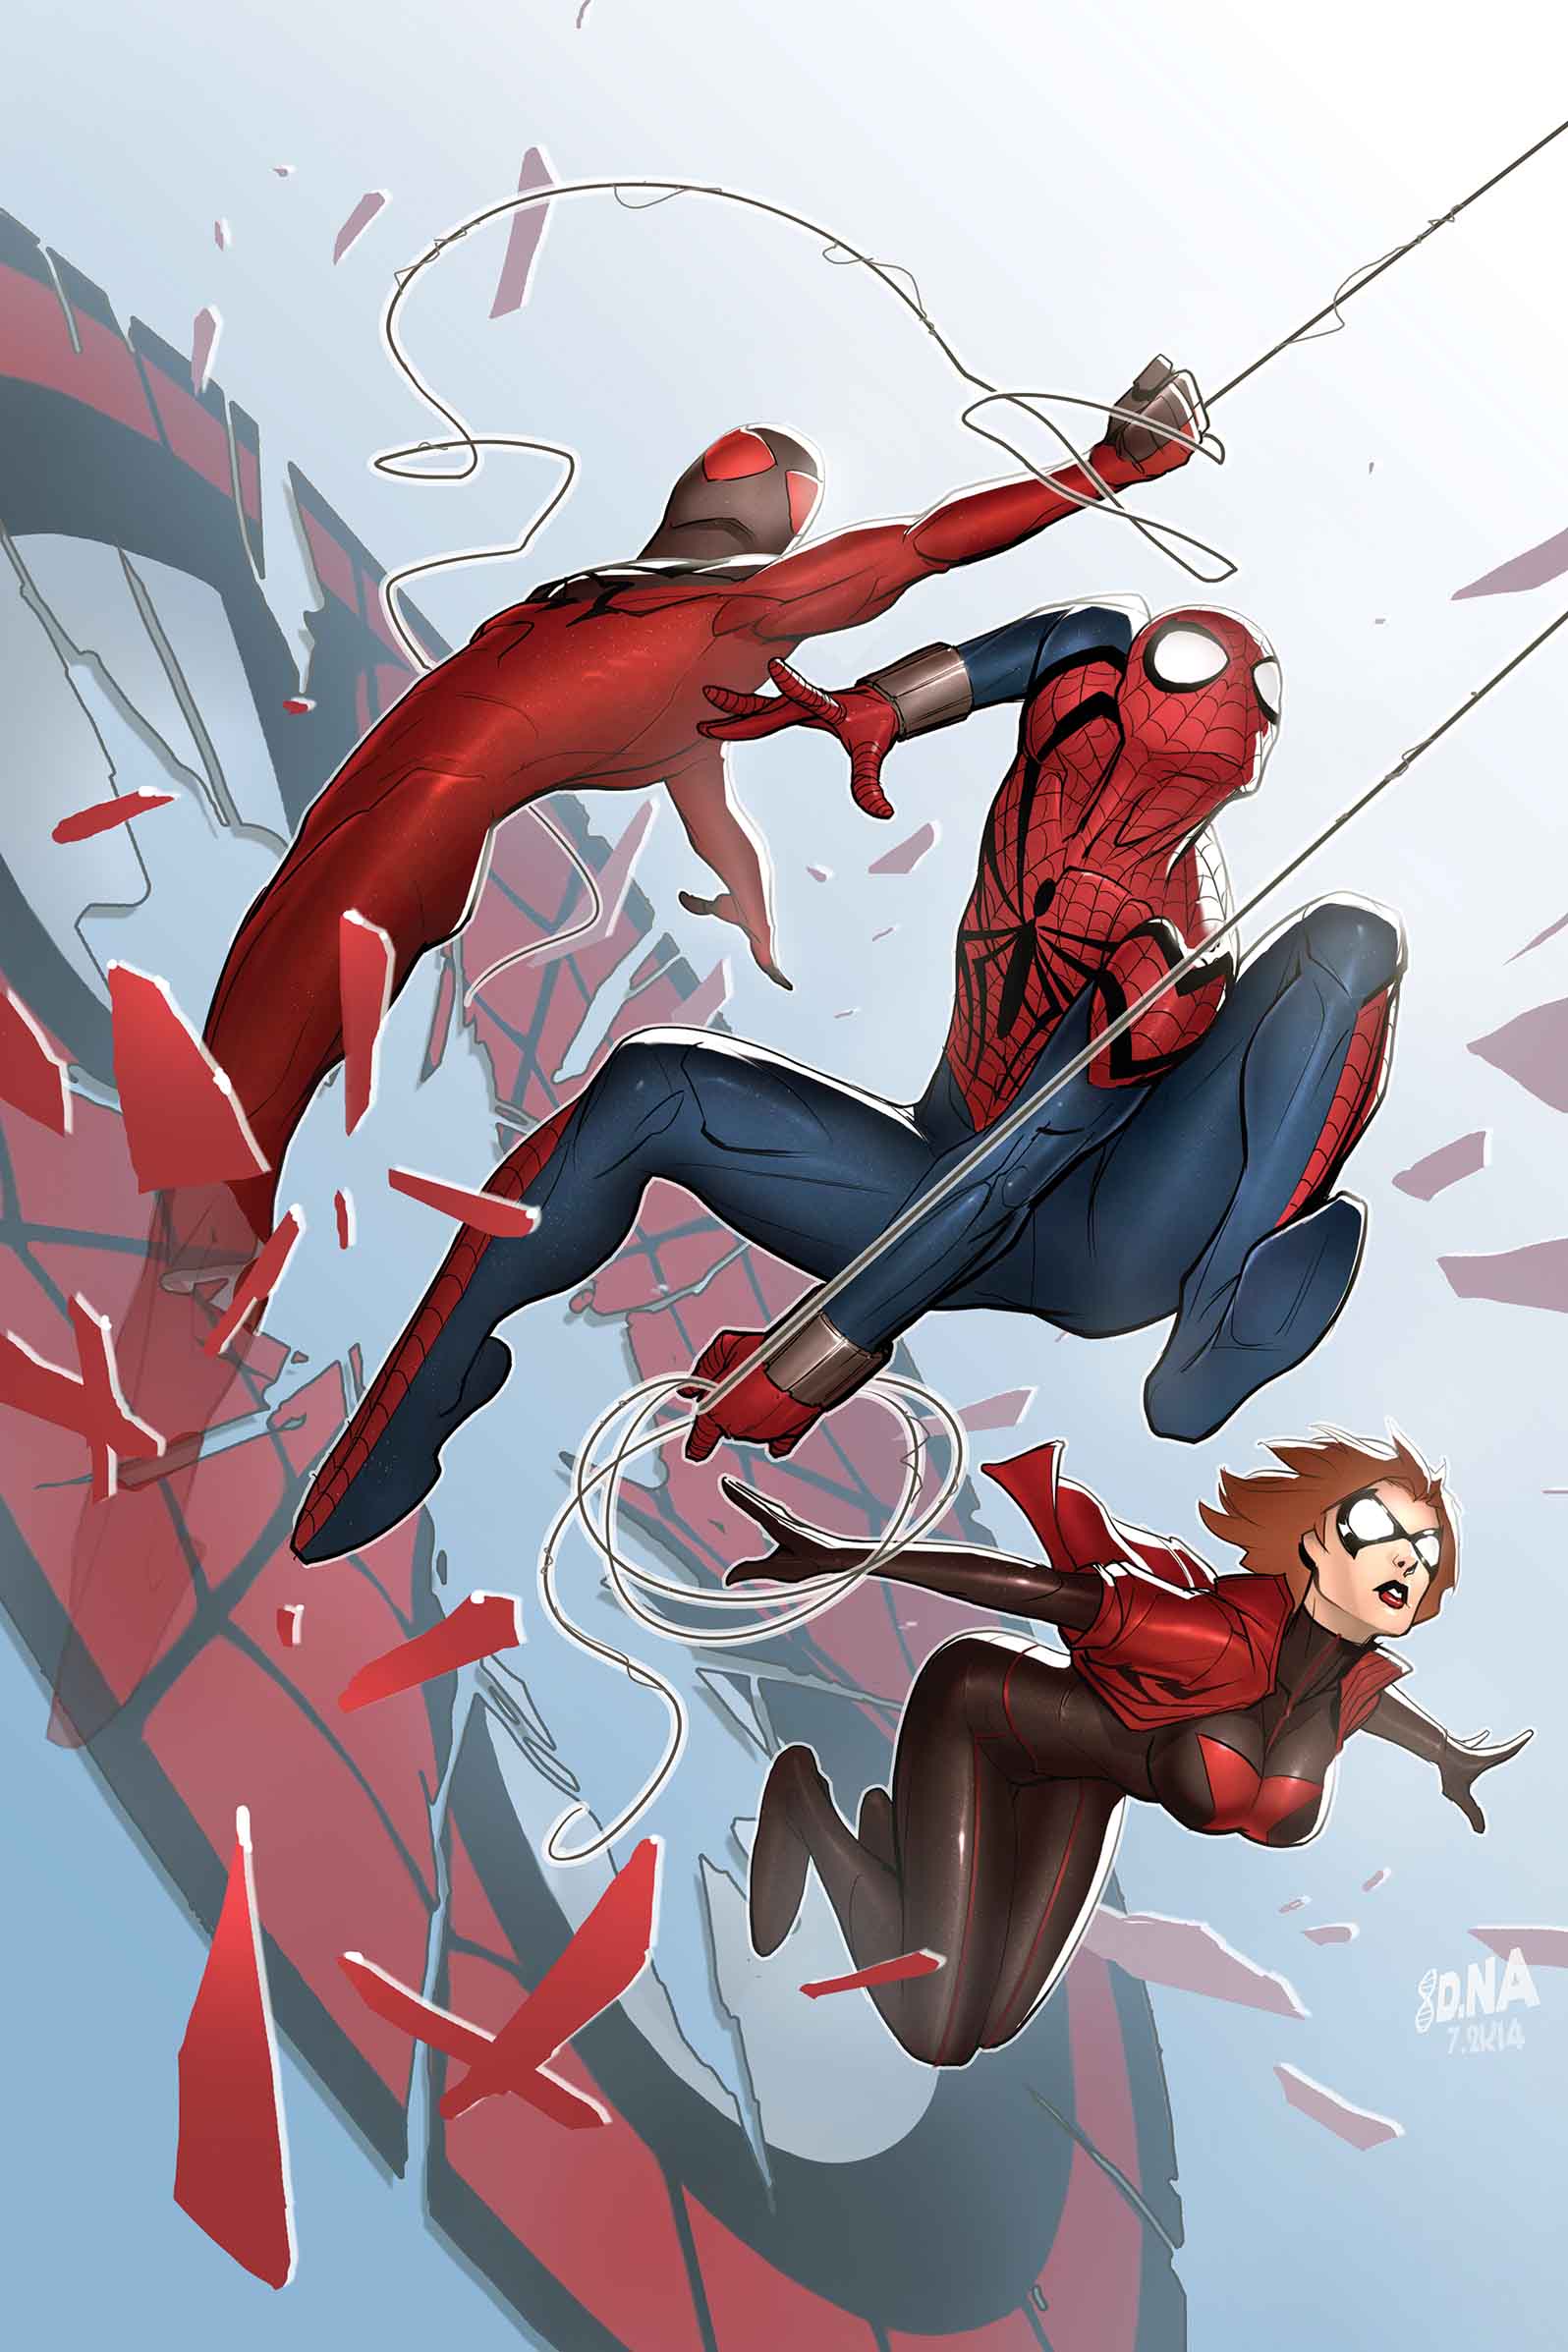 Scarlet_Spiders_1_Cover